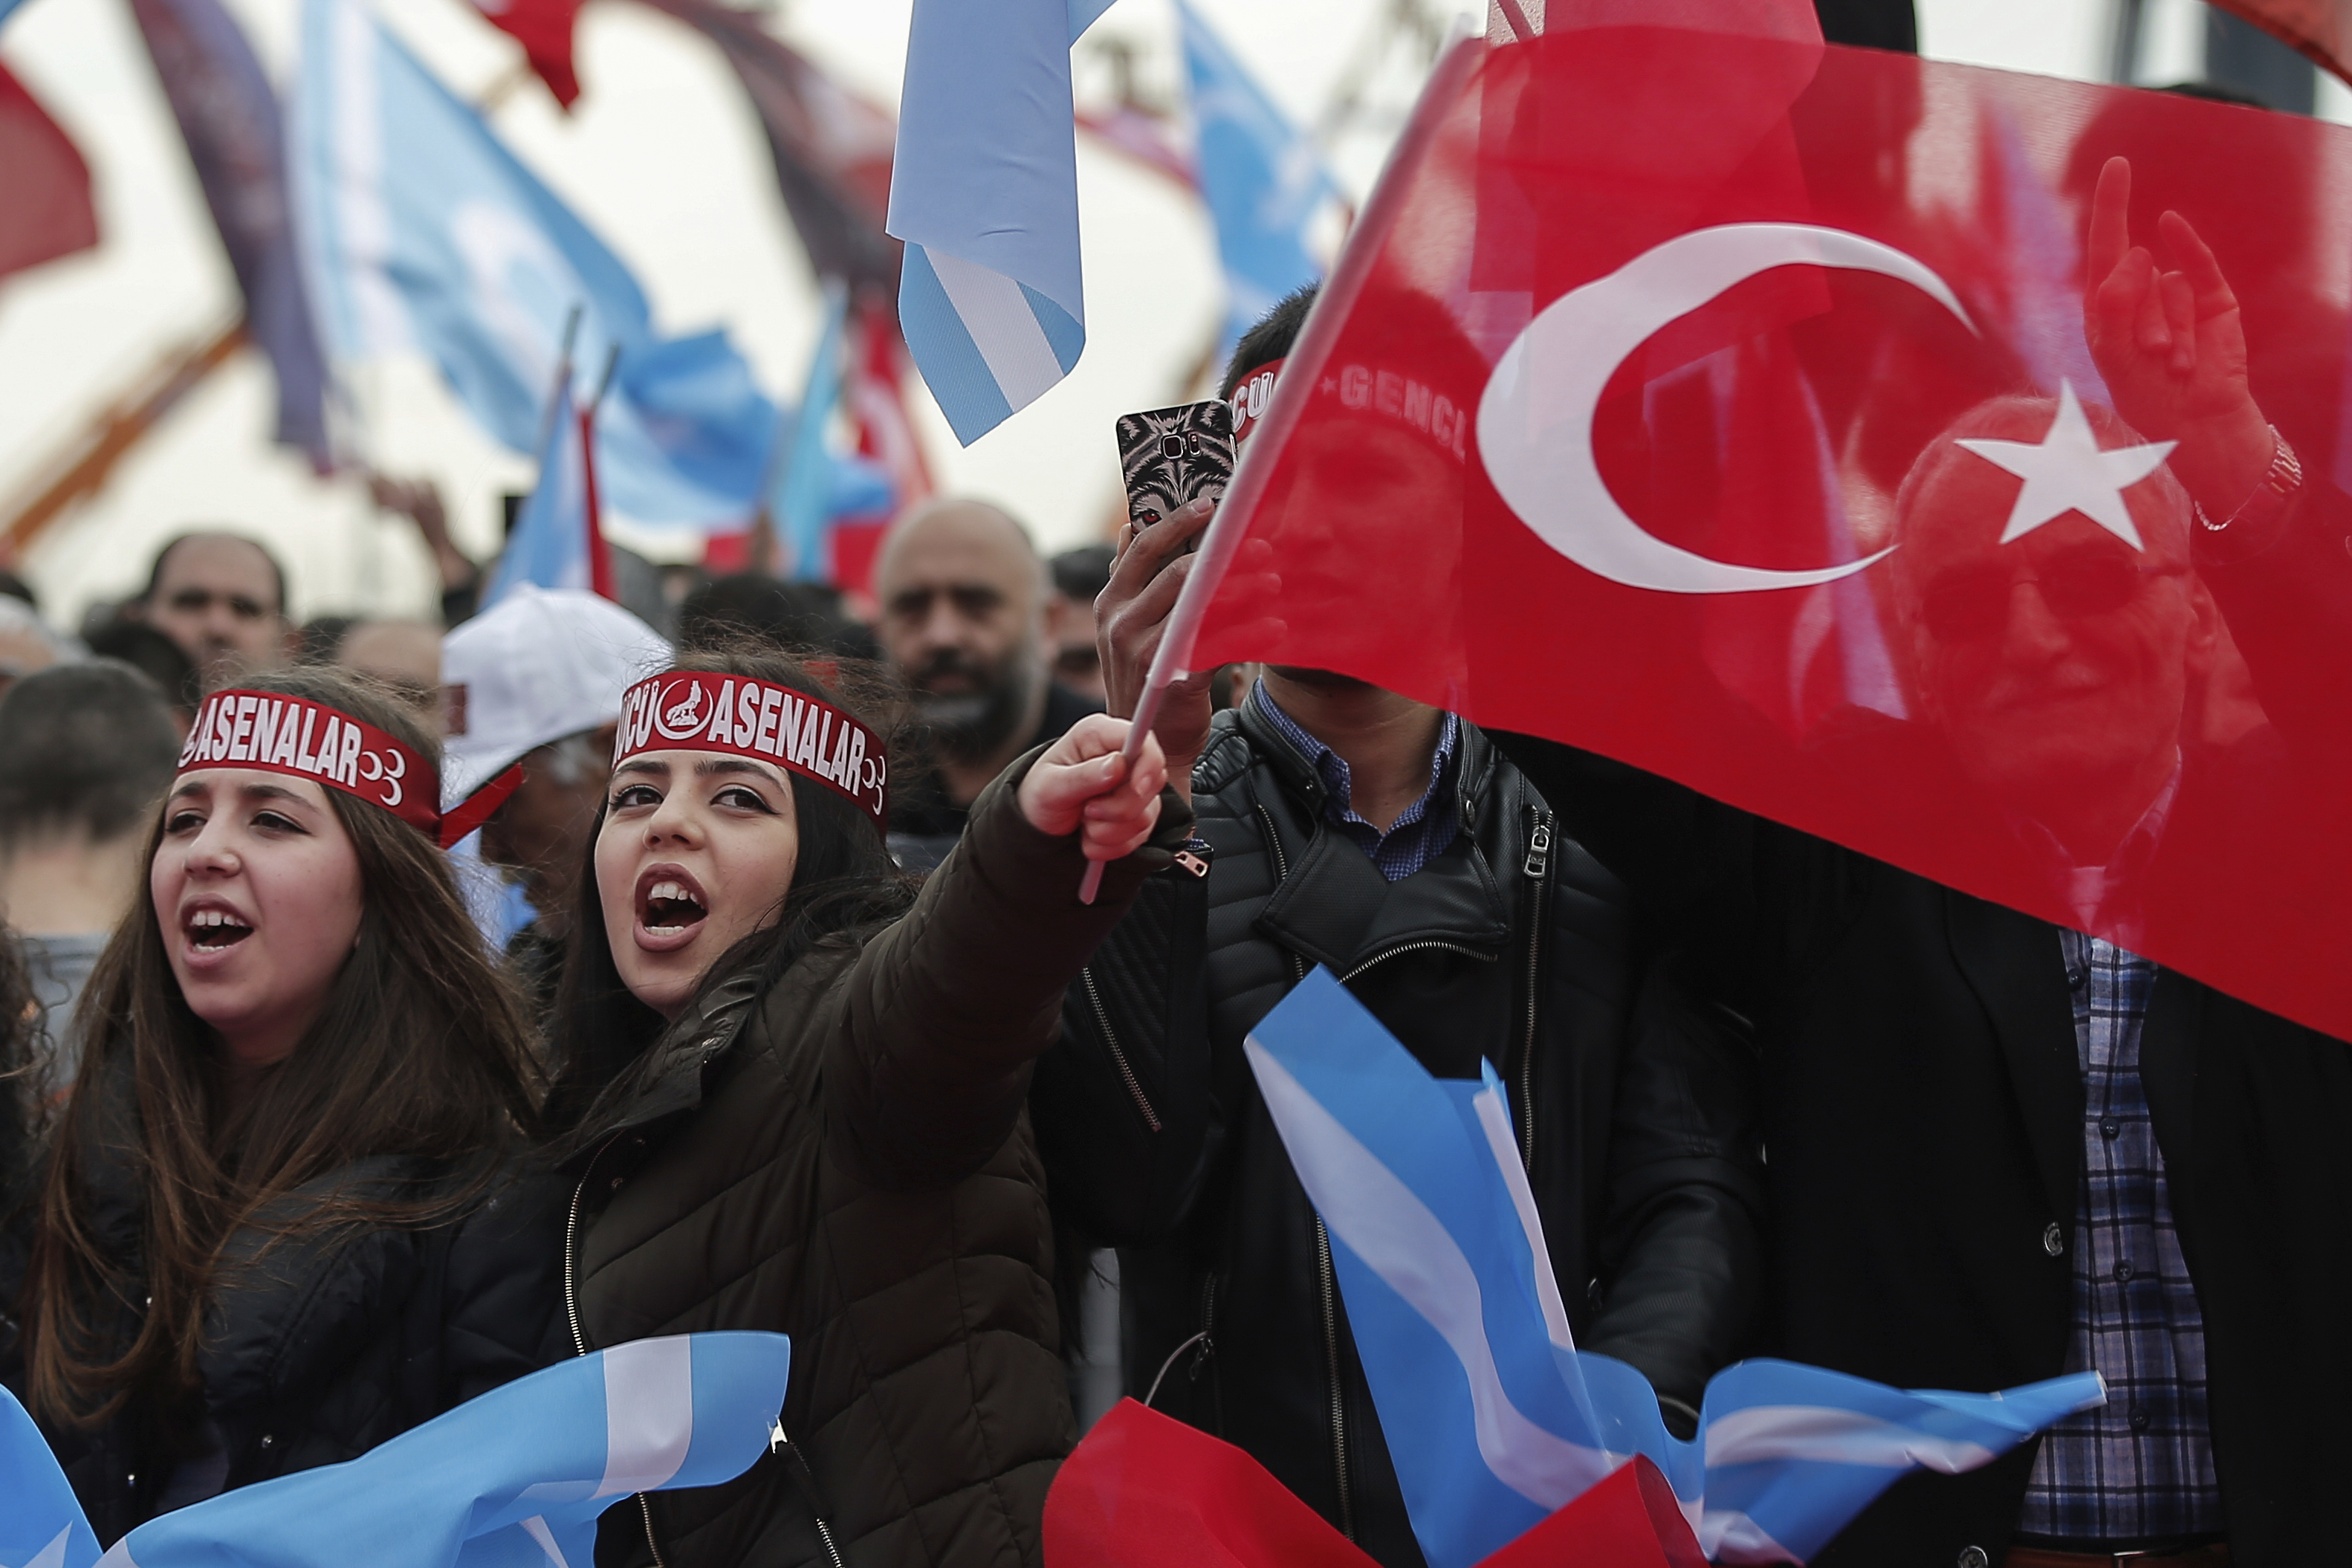 Supporters listen to Devlet Bahceli, the leader of Turkey's opposition Nationalist Movement Party, who supports President Recep Tayyip Erdogan, during a referendum rally in Istanbul, Sunday, April 9, 2017.  Turkey is heading to a contentious April 16 referendum on constitutional reforms to expand Erdogan's powers.(AP Photo/Emrah Gurel)